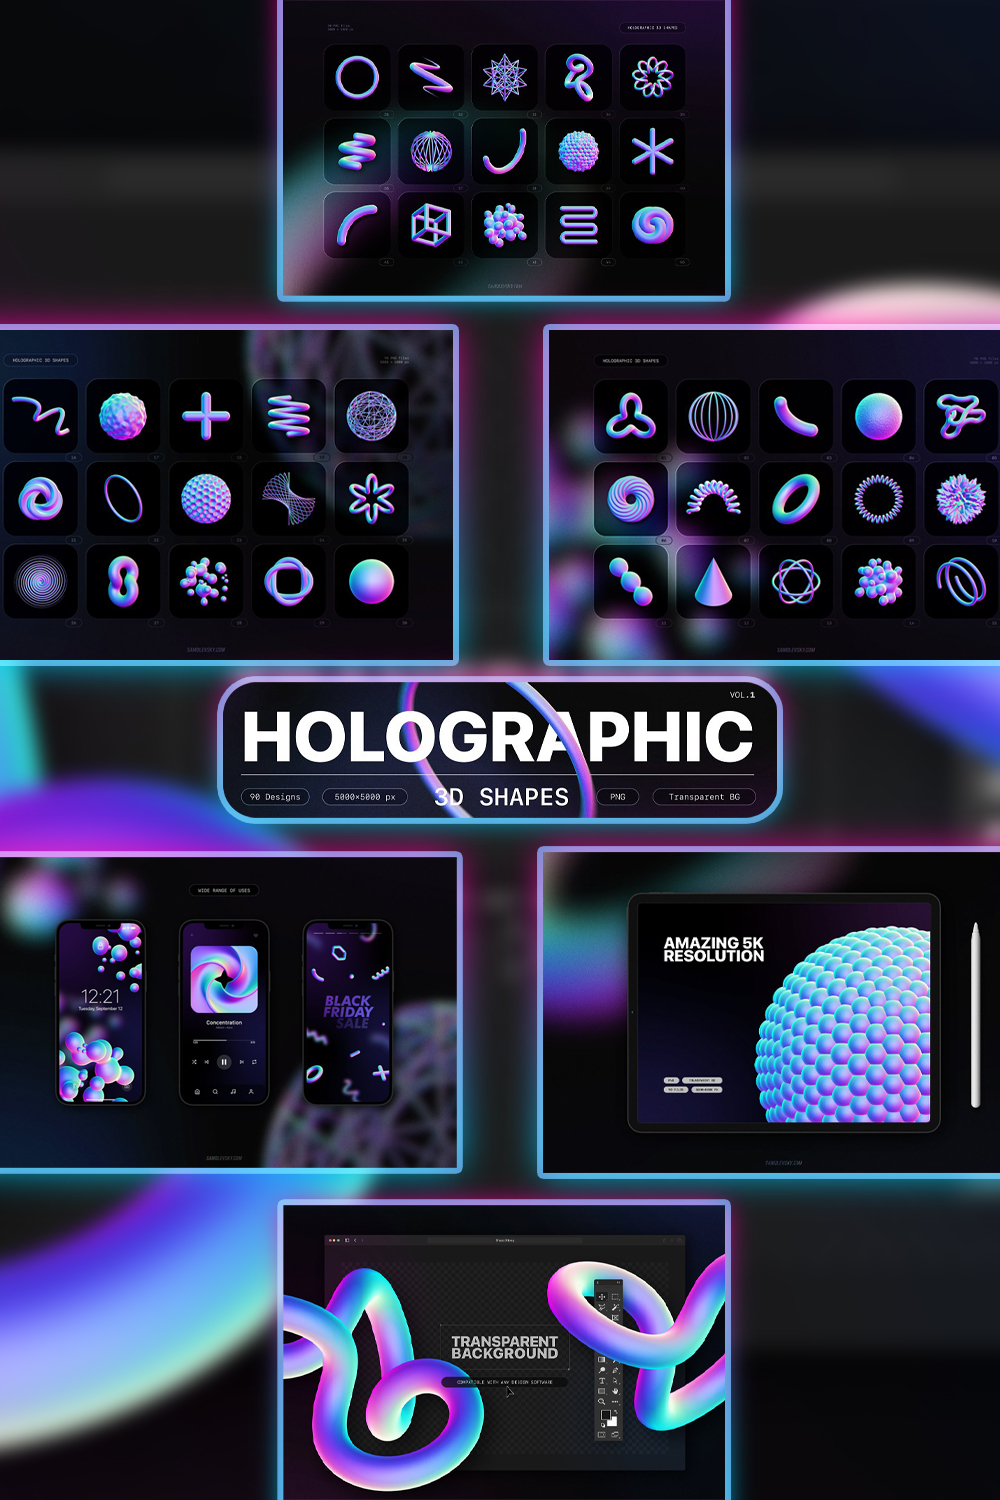 Holographic 3d shapes collection of pinterest.